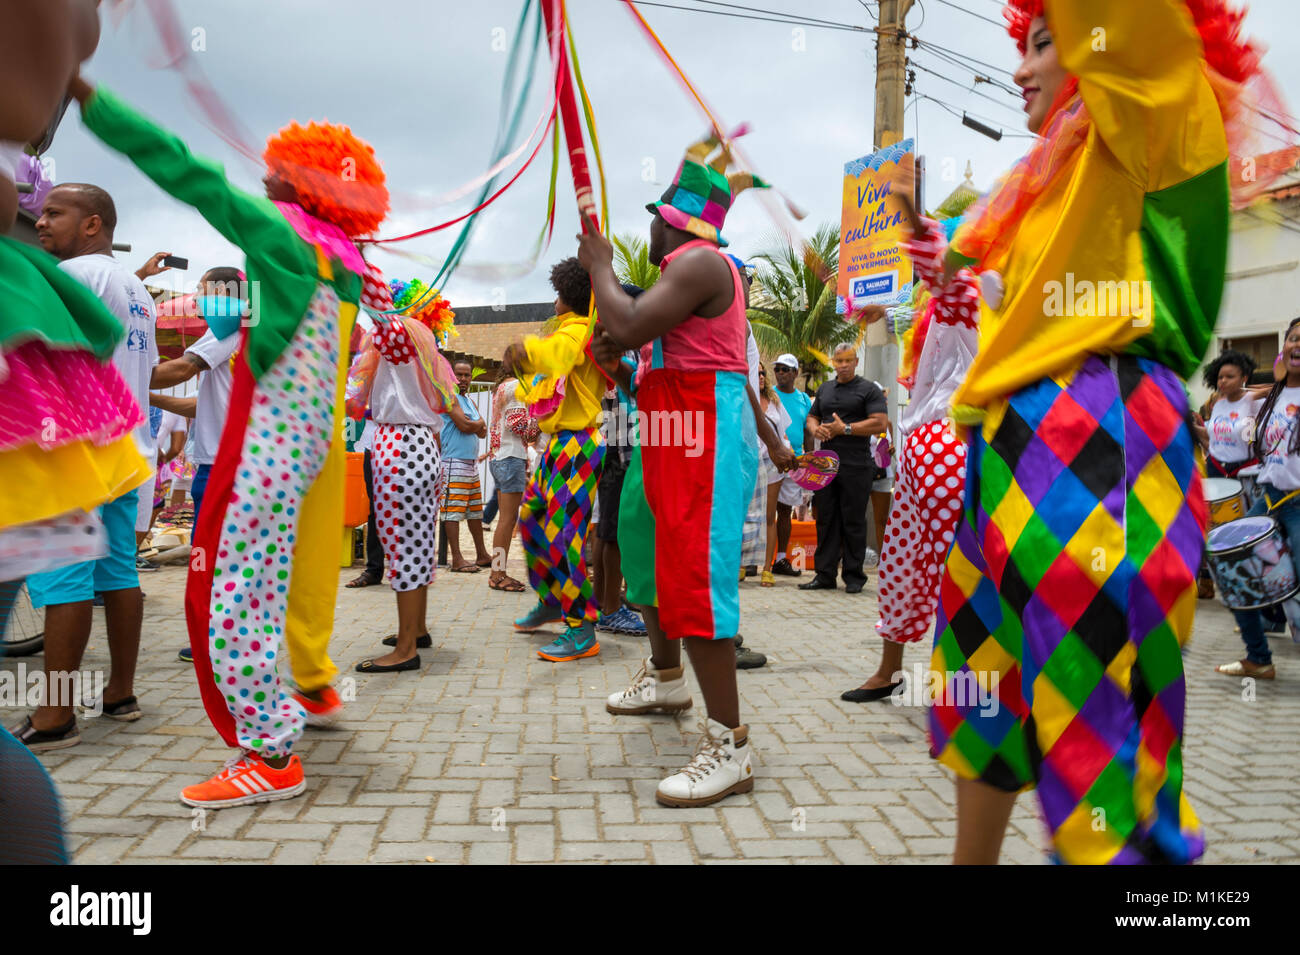 SALVADOR, BRAZIL -  CIRCA FEBRUARY, 2016: People in colorful costumes celebrate at annual Festival of Yemanja in the Rio Vermelho neighborhood Stock Photo